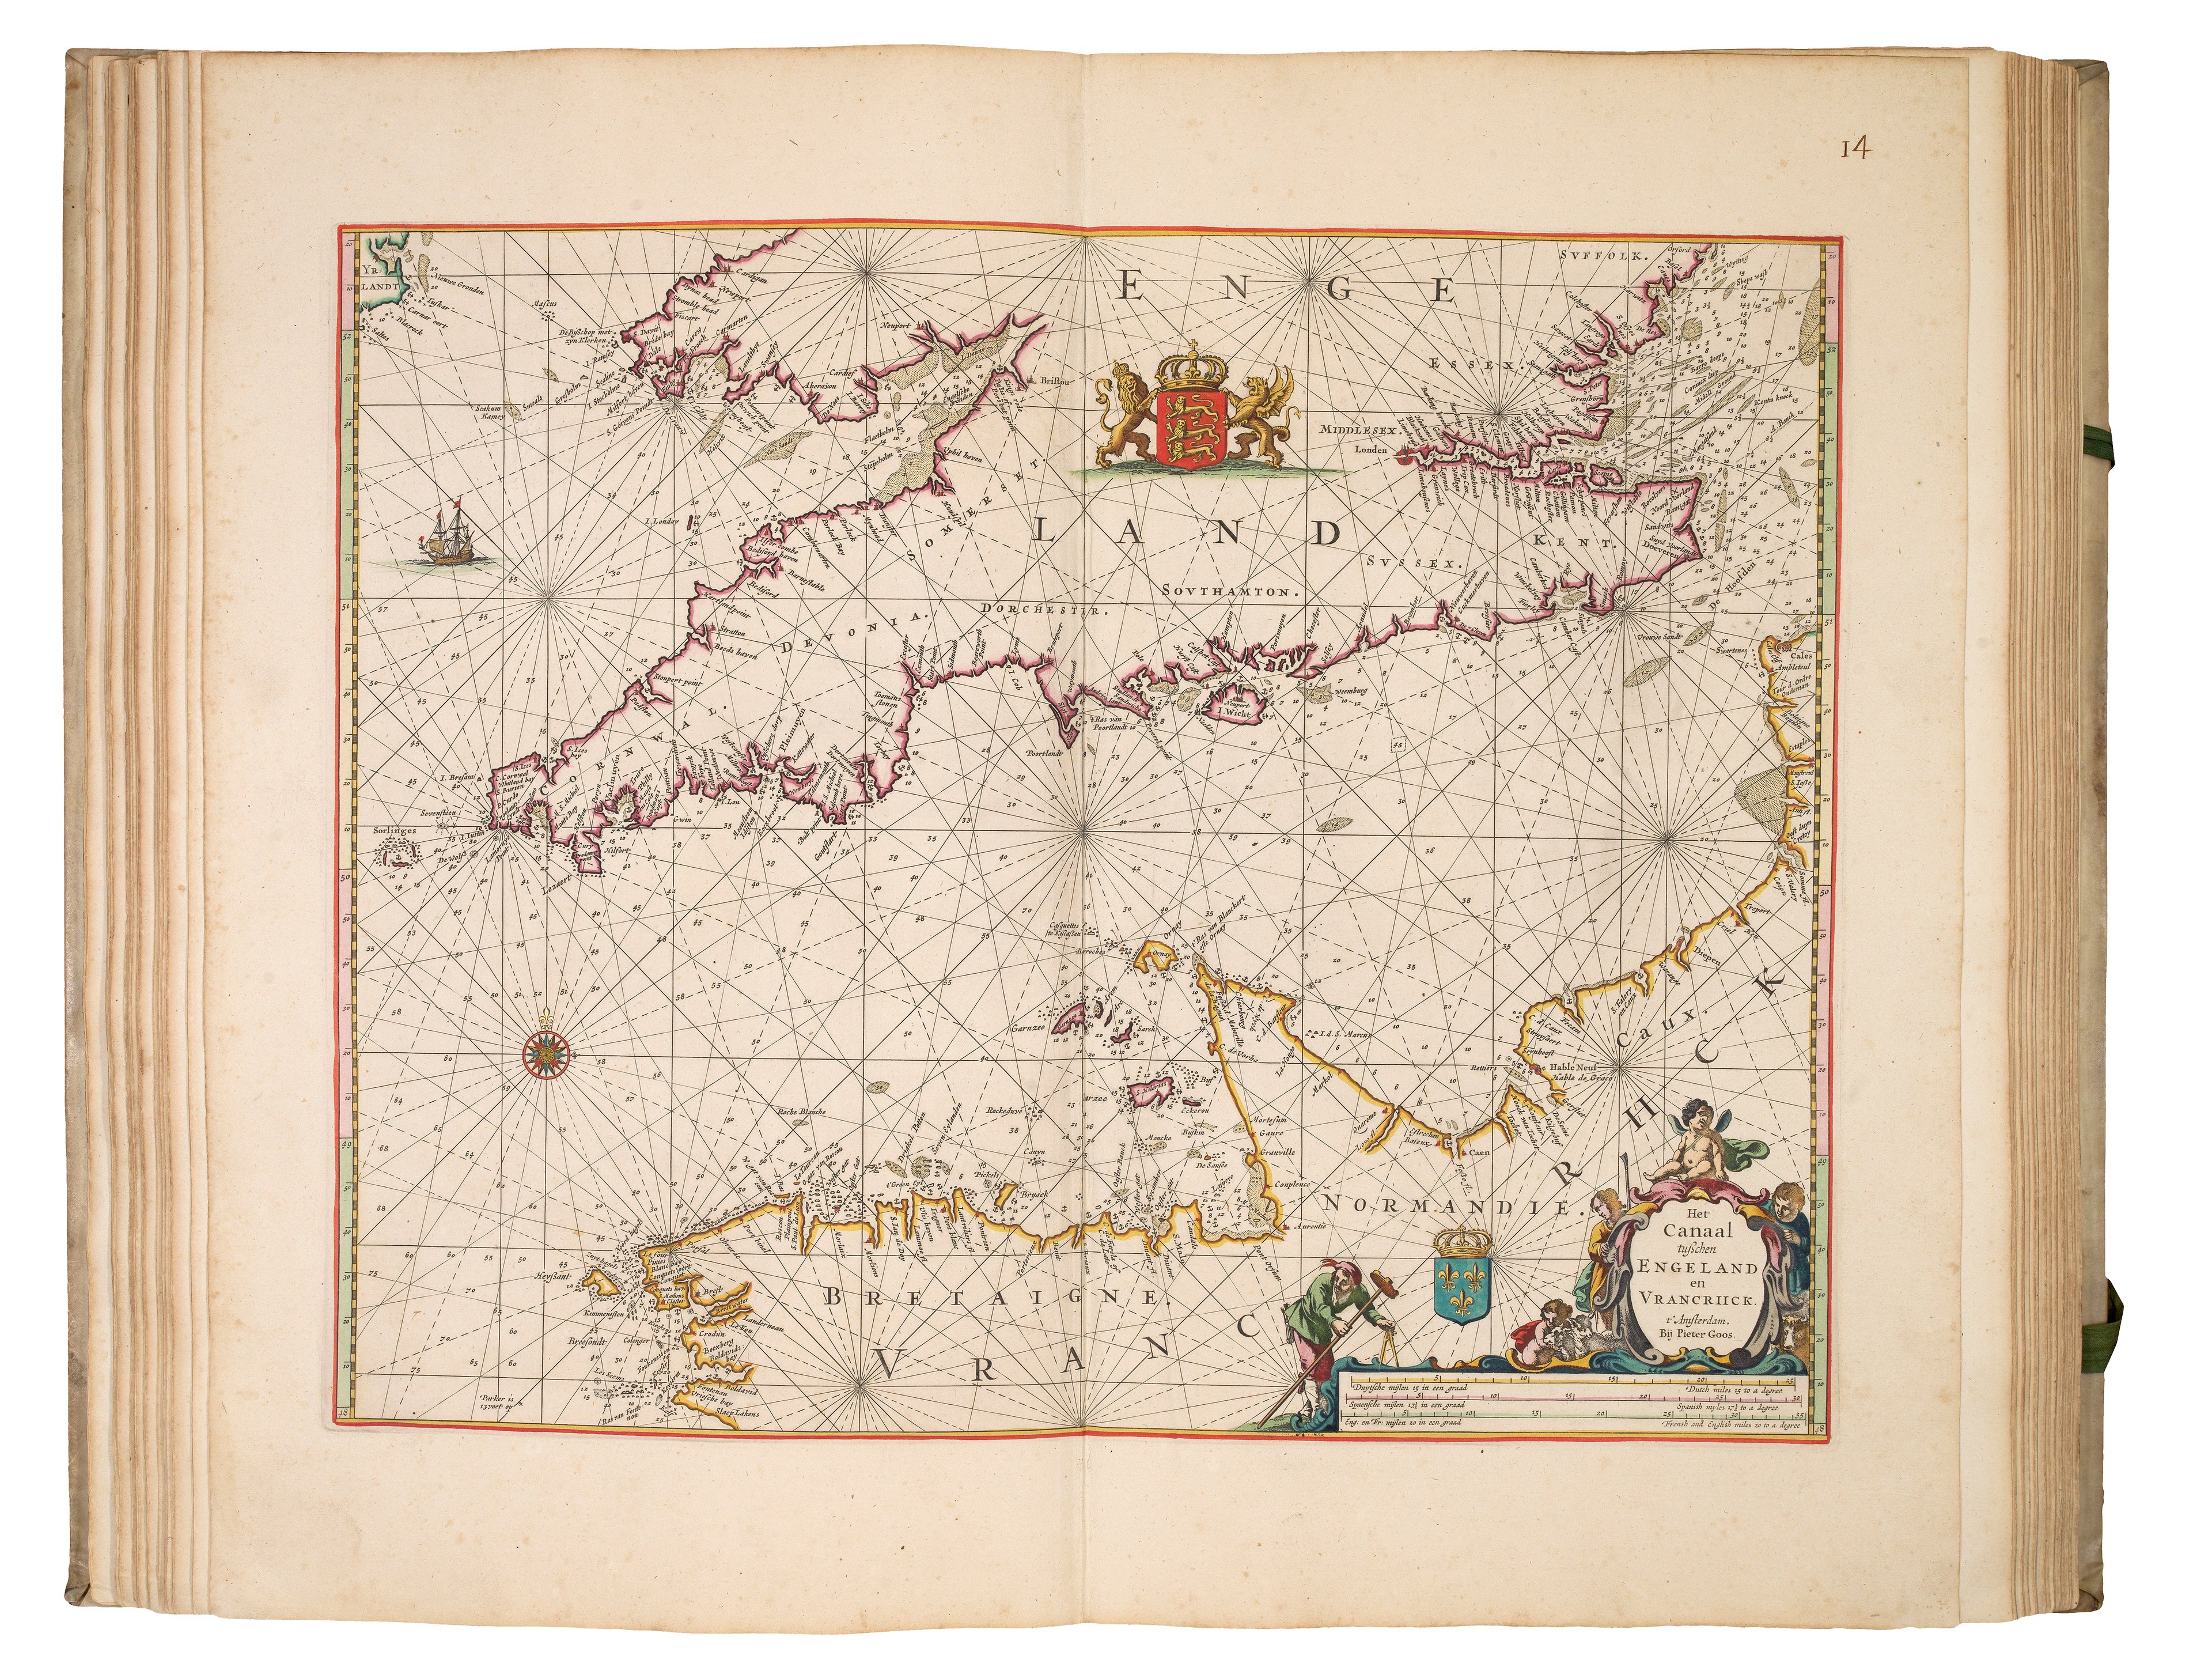 An open spread of a book, showing a sea chart of the English Channel. The outline of the coasts are finely drawn, and are coloured in red (England) and yellow (France), however the sea and land are uncoloured. Details on the map such as the cartouche are hand coloured. The chart shows crisscrossing lines called rhumb lines.